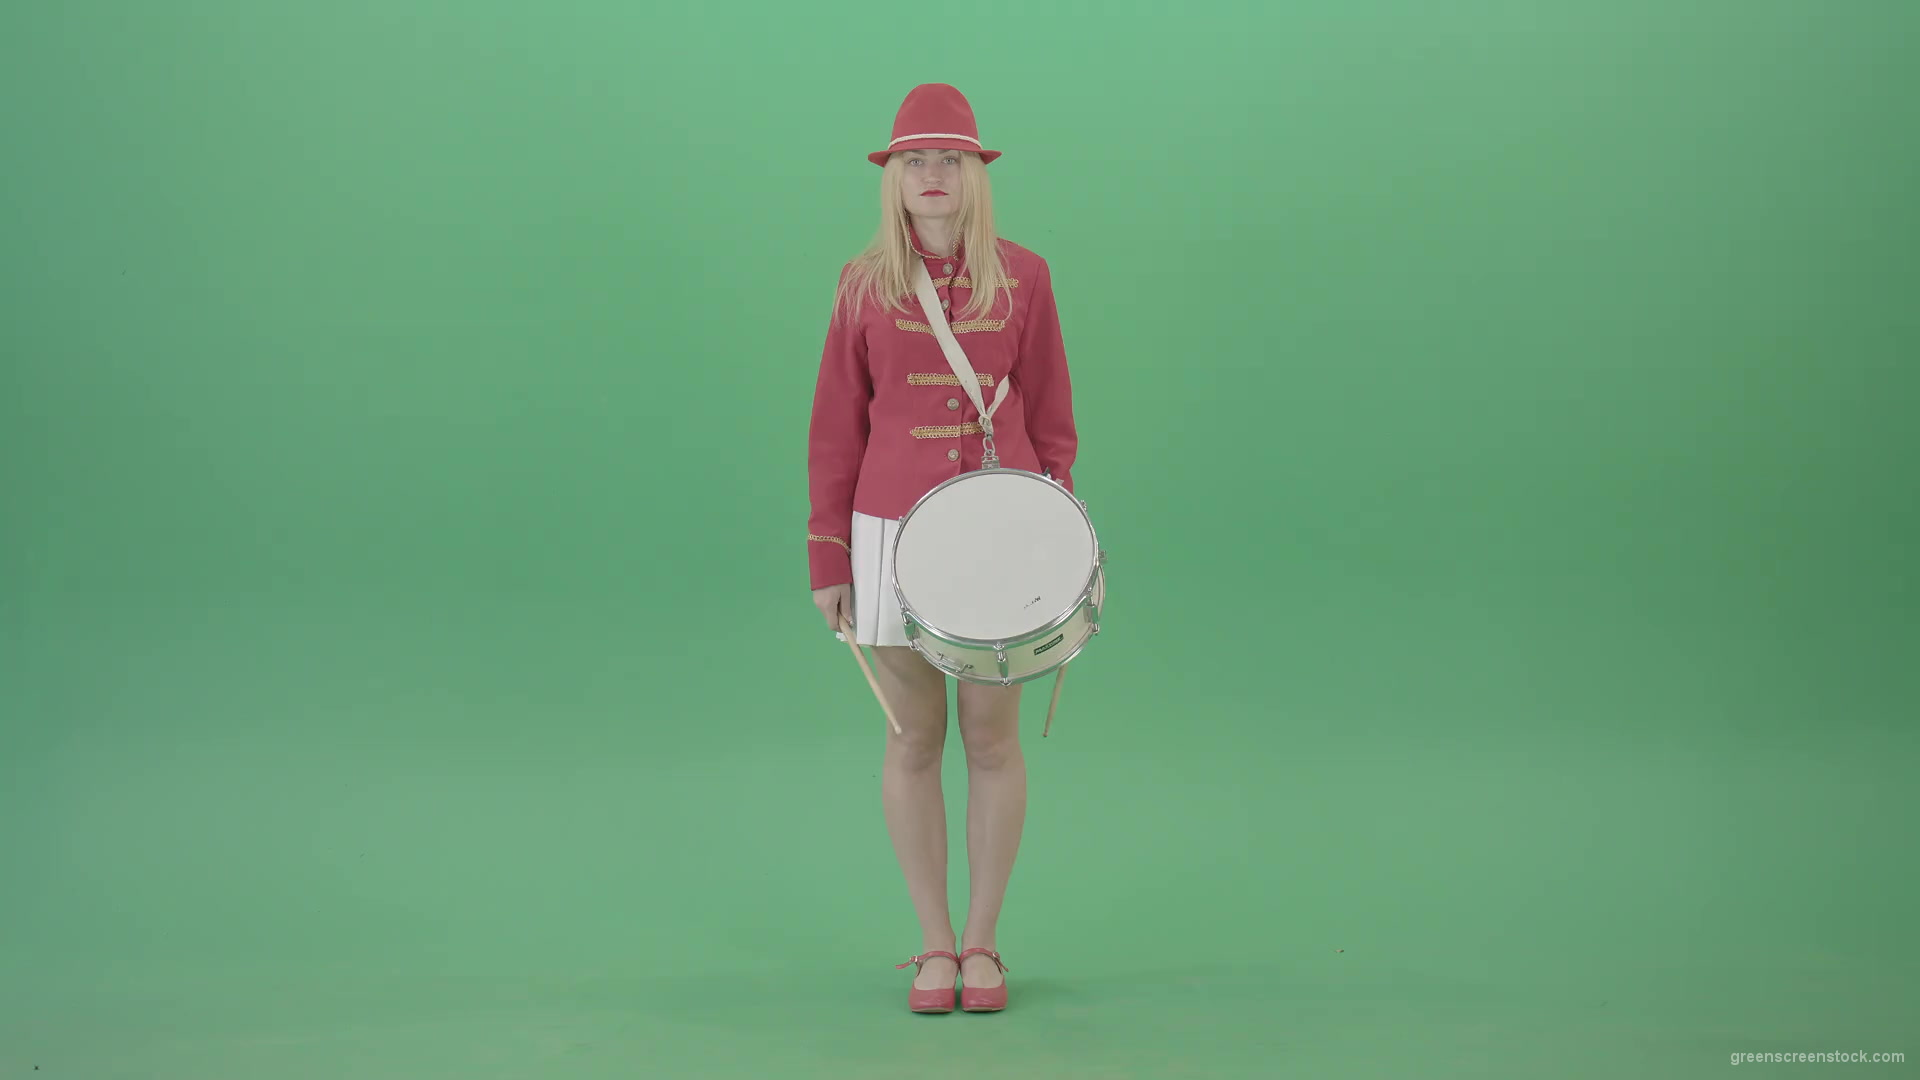 Girl-fast-playing-drum-music-instrument-isolated-on-Green-Background-4K-Video-Footage-1920_001 Green Screen Stock